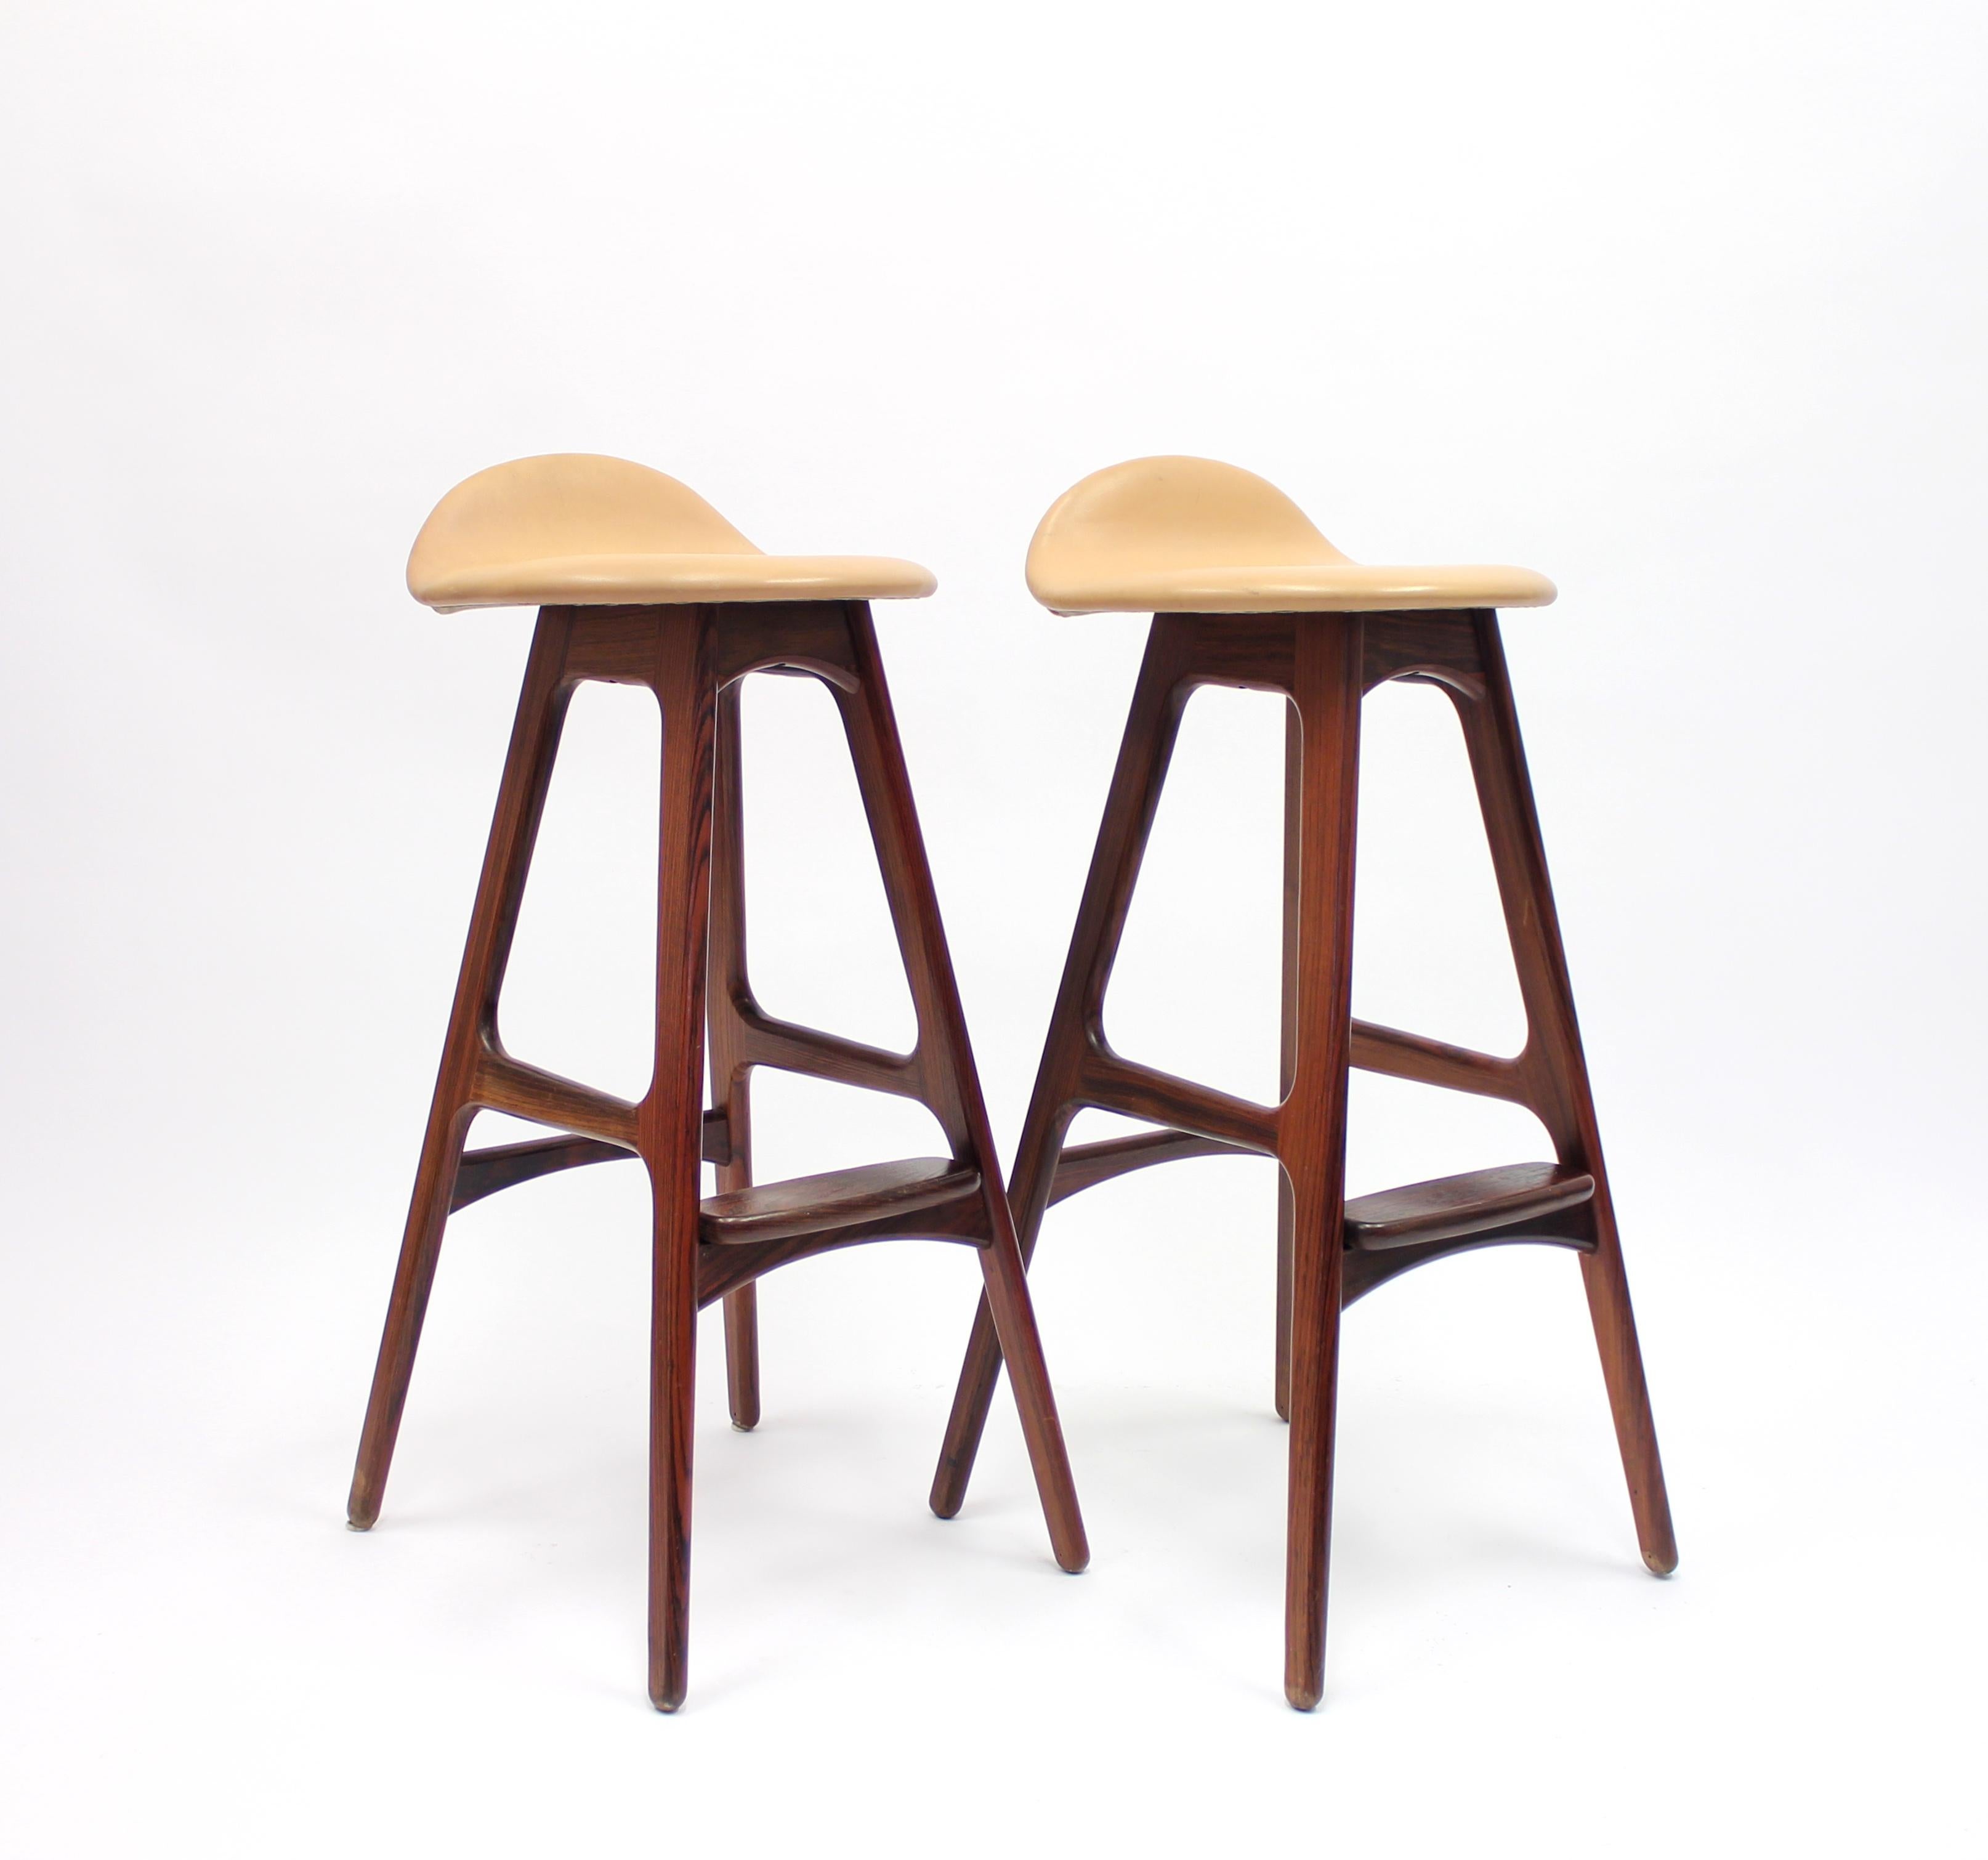 Pair of rosewood and leather barstools, model OD61, by Erik Buch for Oddense Maskinsnedkeri A-S, designed and produced in the 1960s. Both chairs are labeled by the maker. All original condition with light ware consistent with age and use.